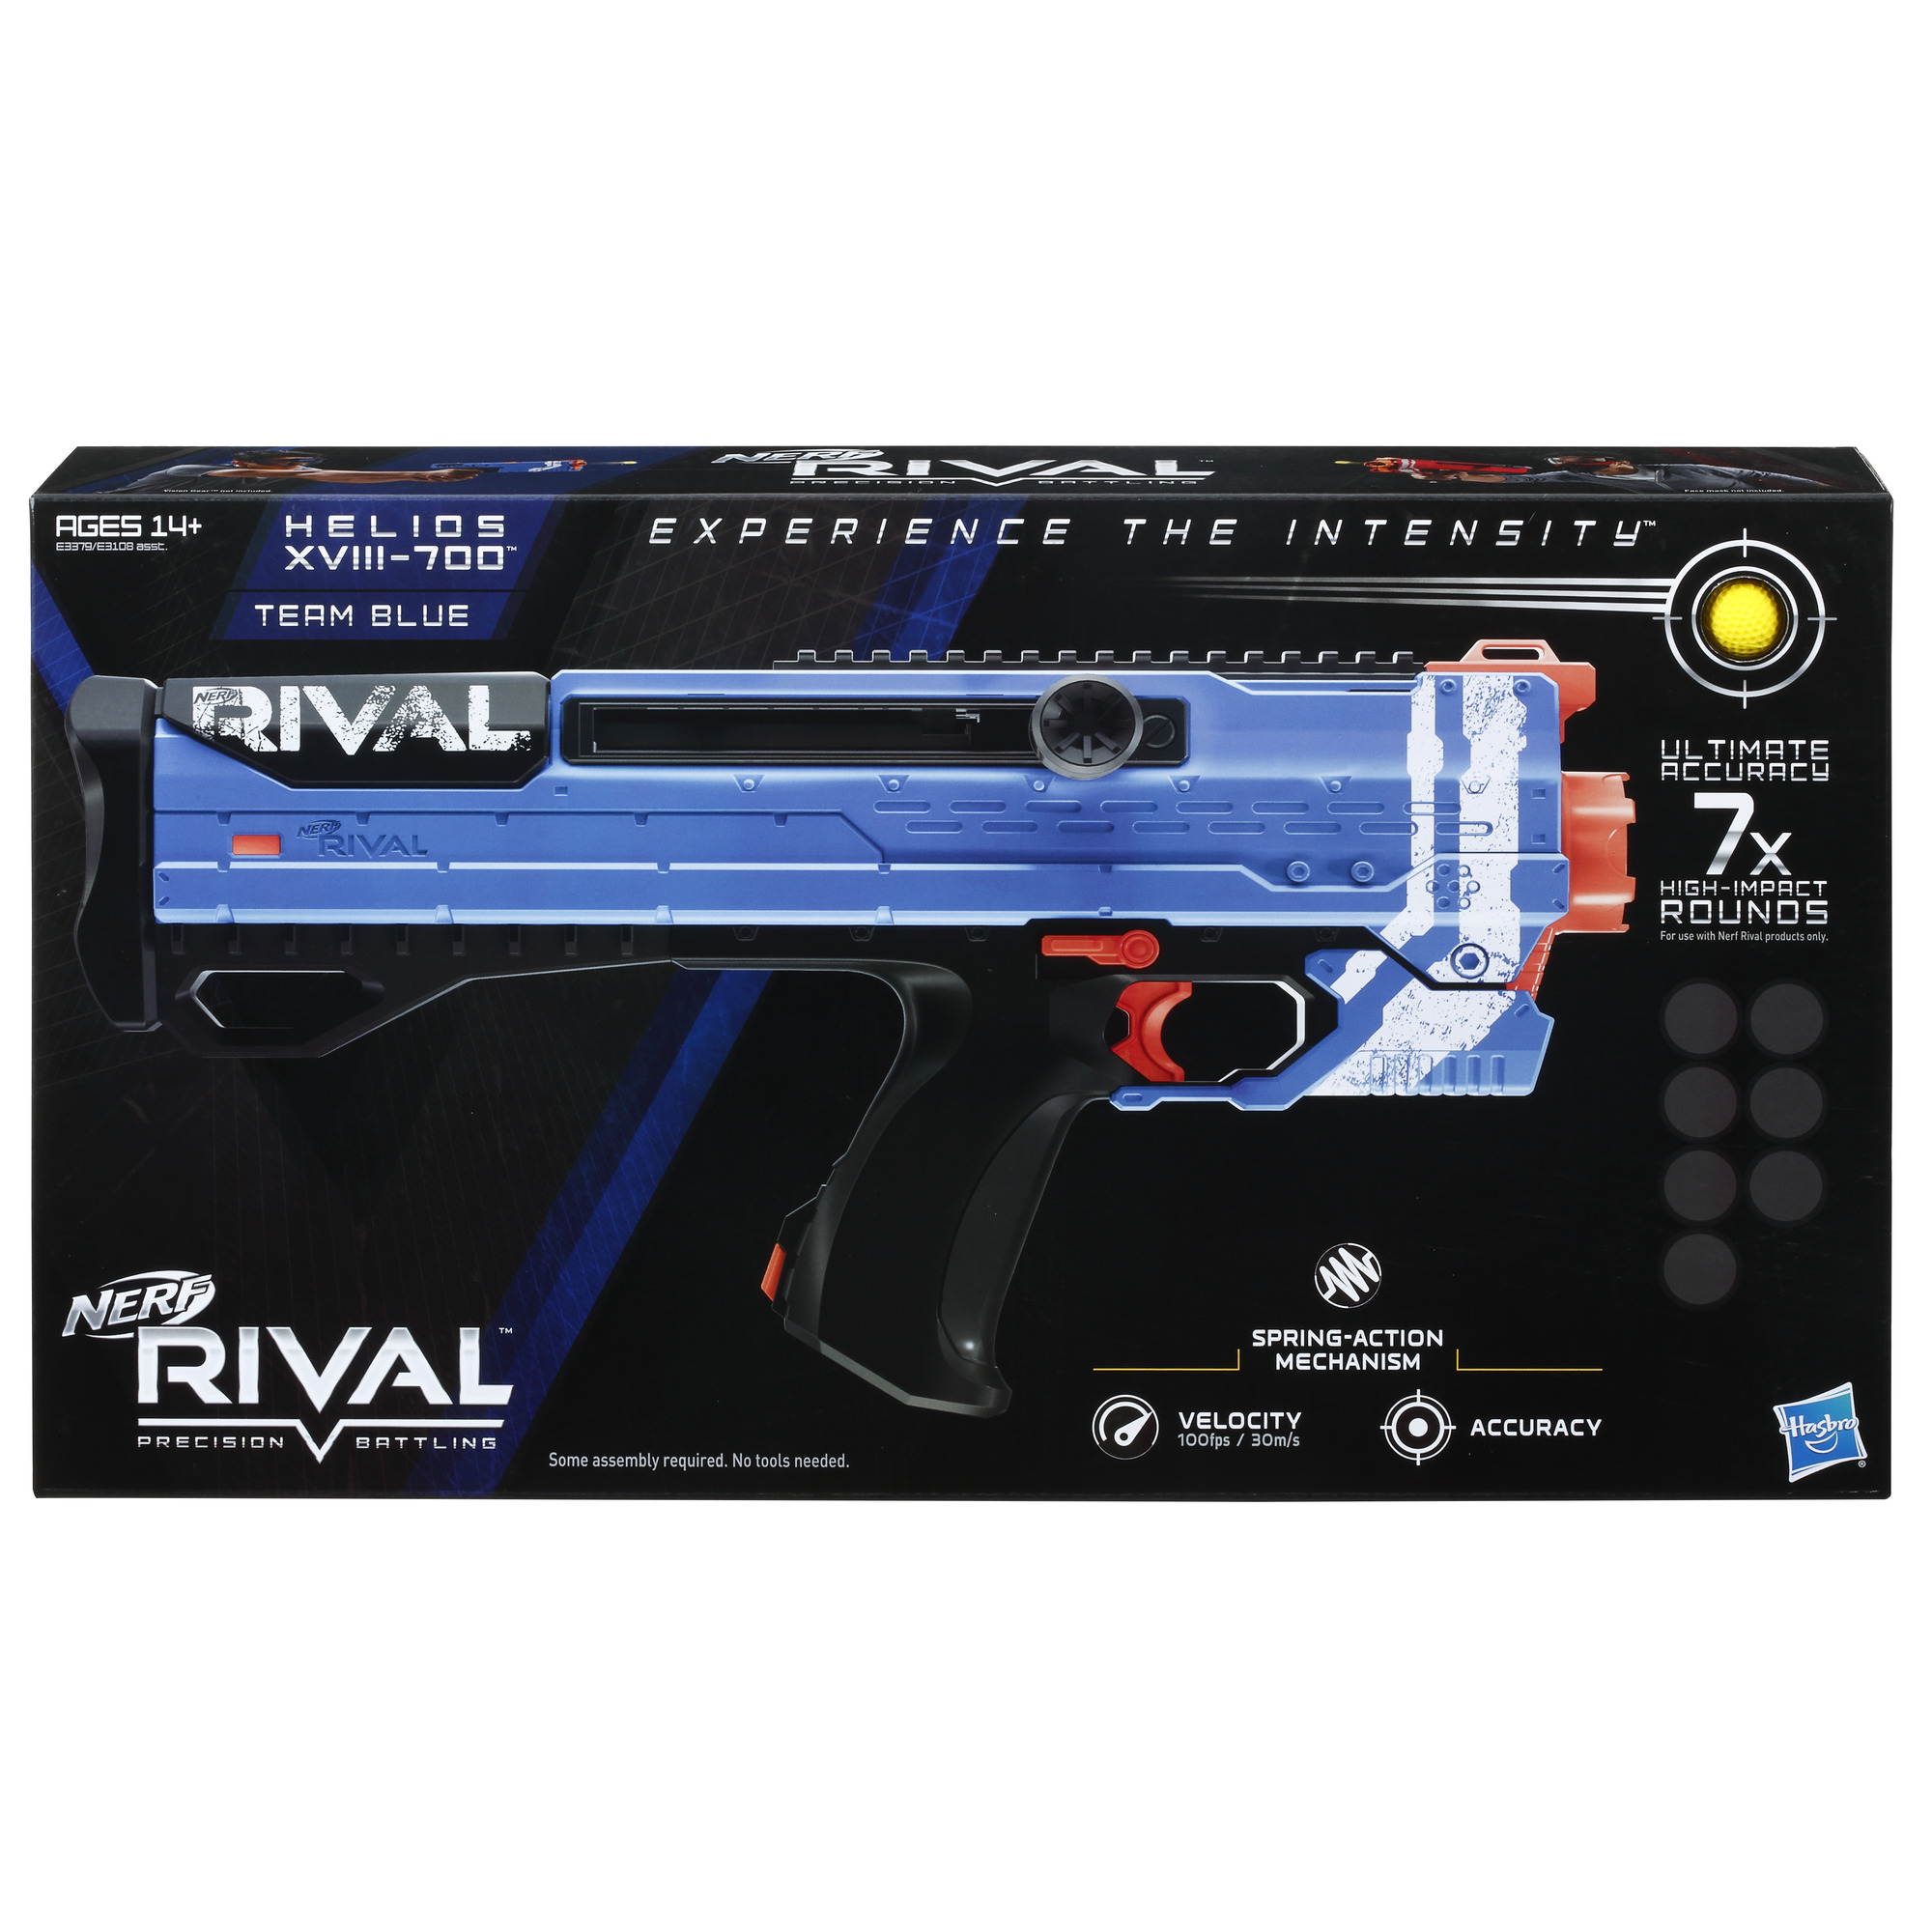 Helios XVIII-700 Nerf Rival Blaster (Blue) -- Bolt-Action, 7 Official Nerf Rival Rounds, 7-Round Magazine - image 2 of 8